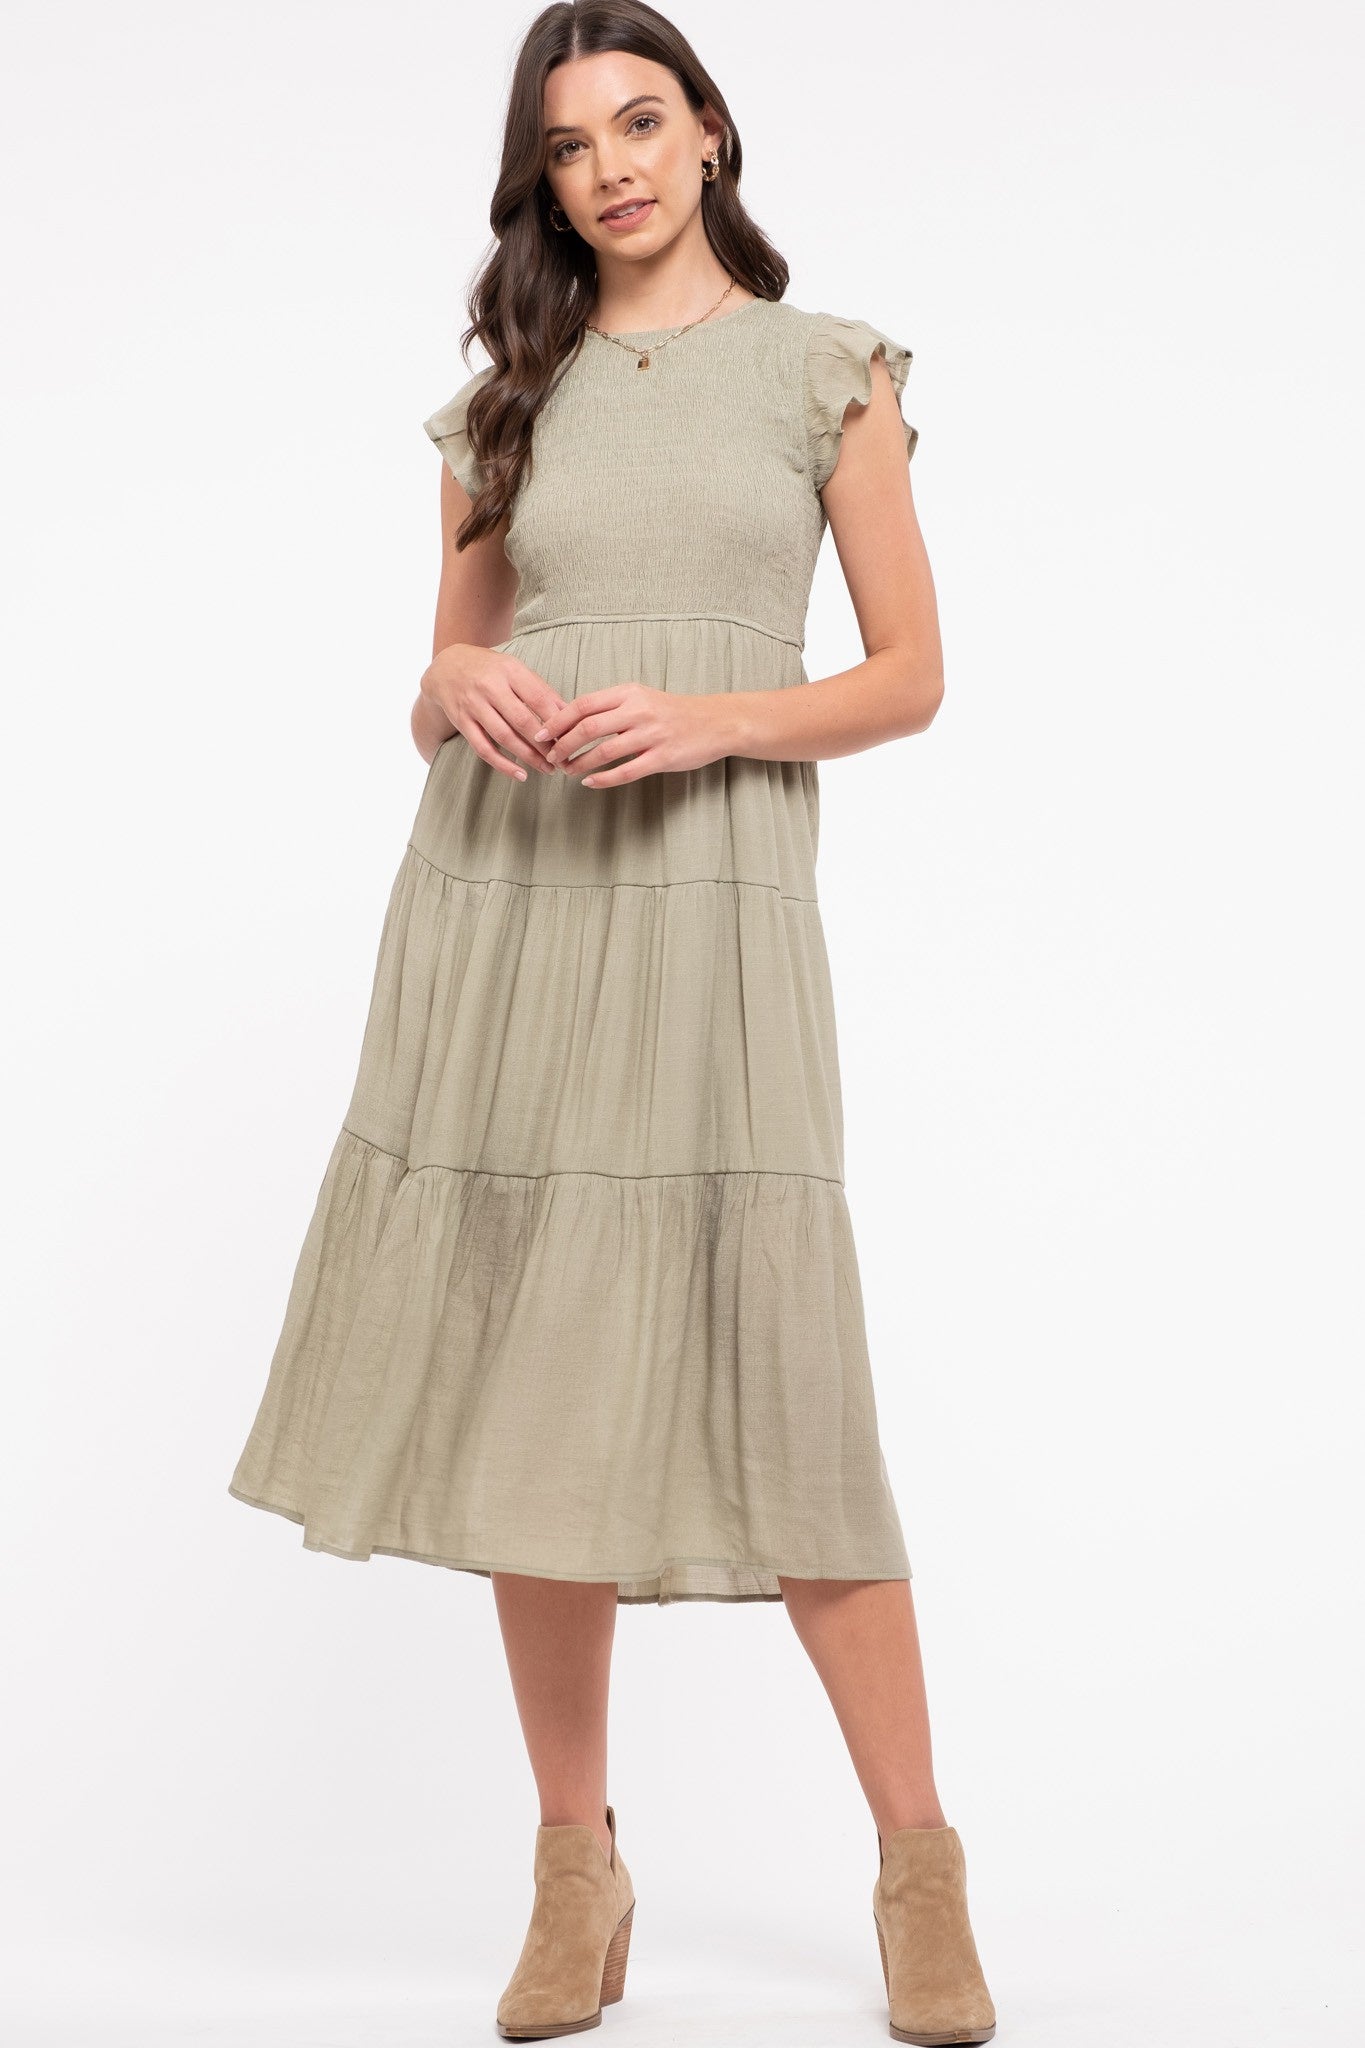 Brunette model wearing light olive colored dress, features a short ruffle sleeve, fitted smocked top, and flowy skirt with 3 tiers. Dress hits her at mid-calf. She wears with brown ankle boots.